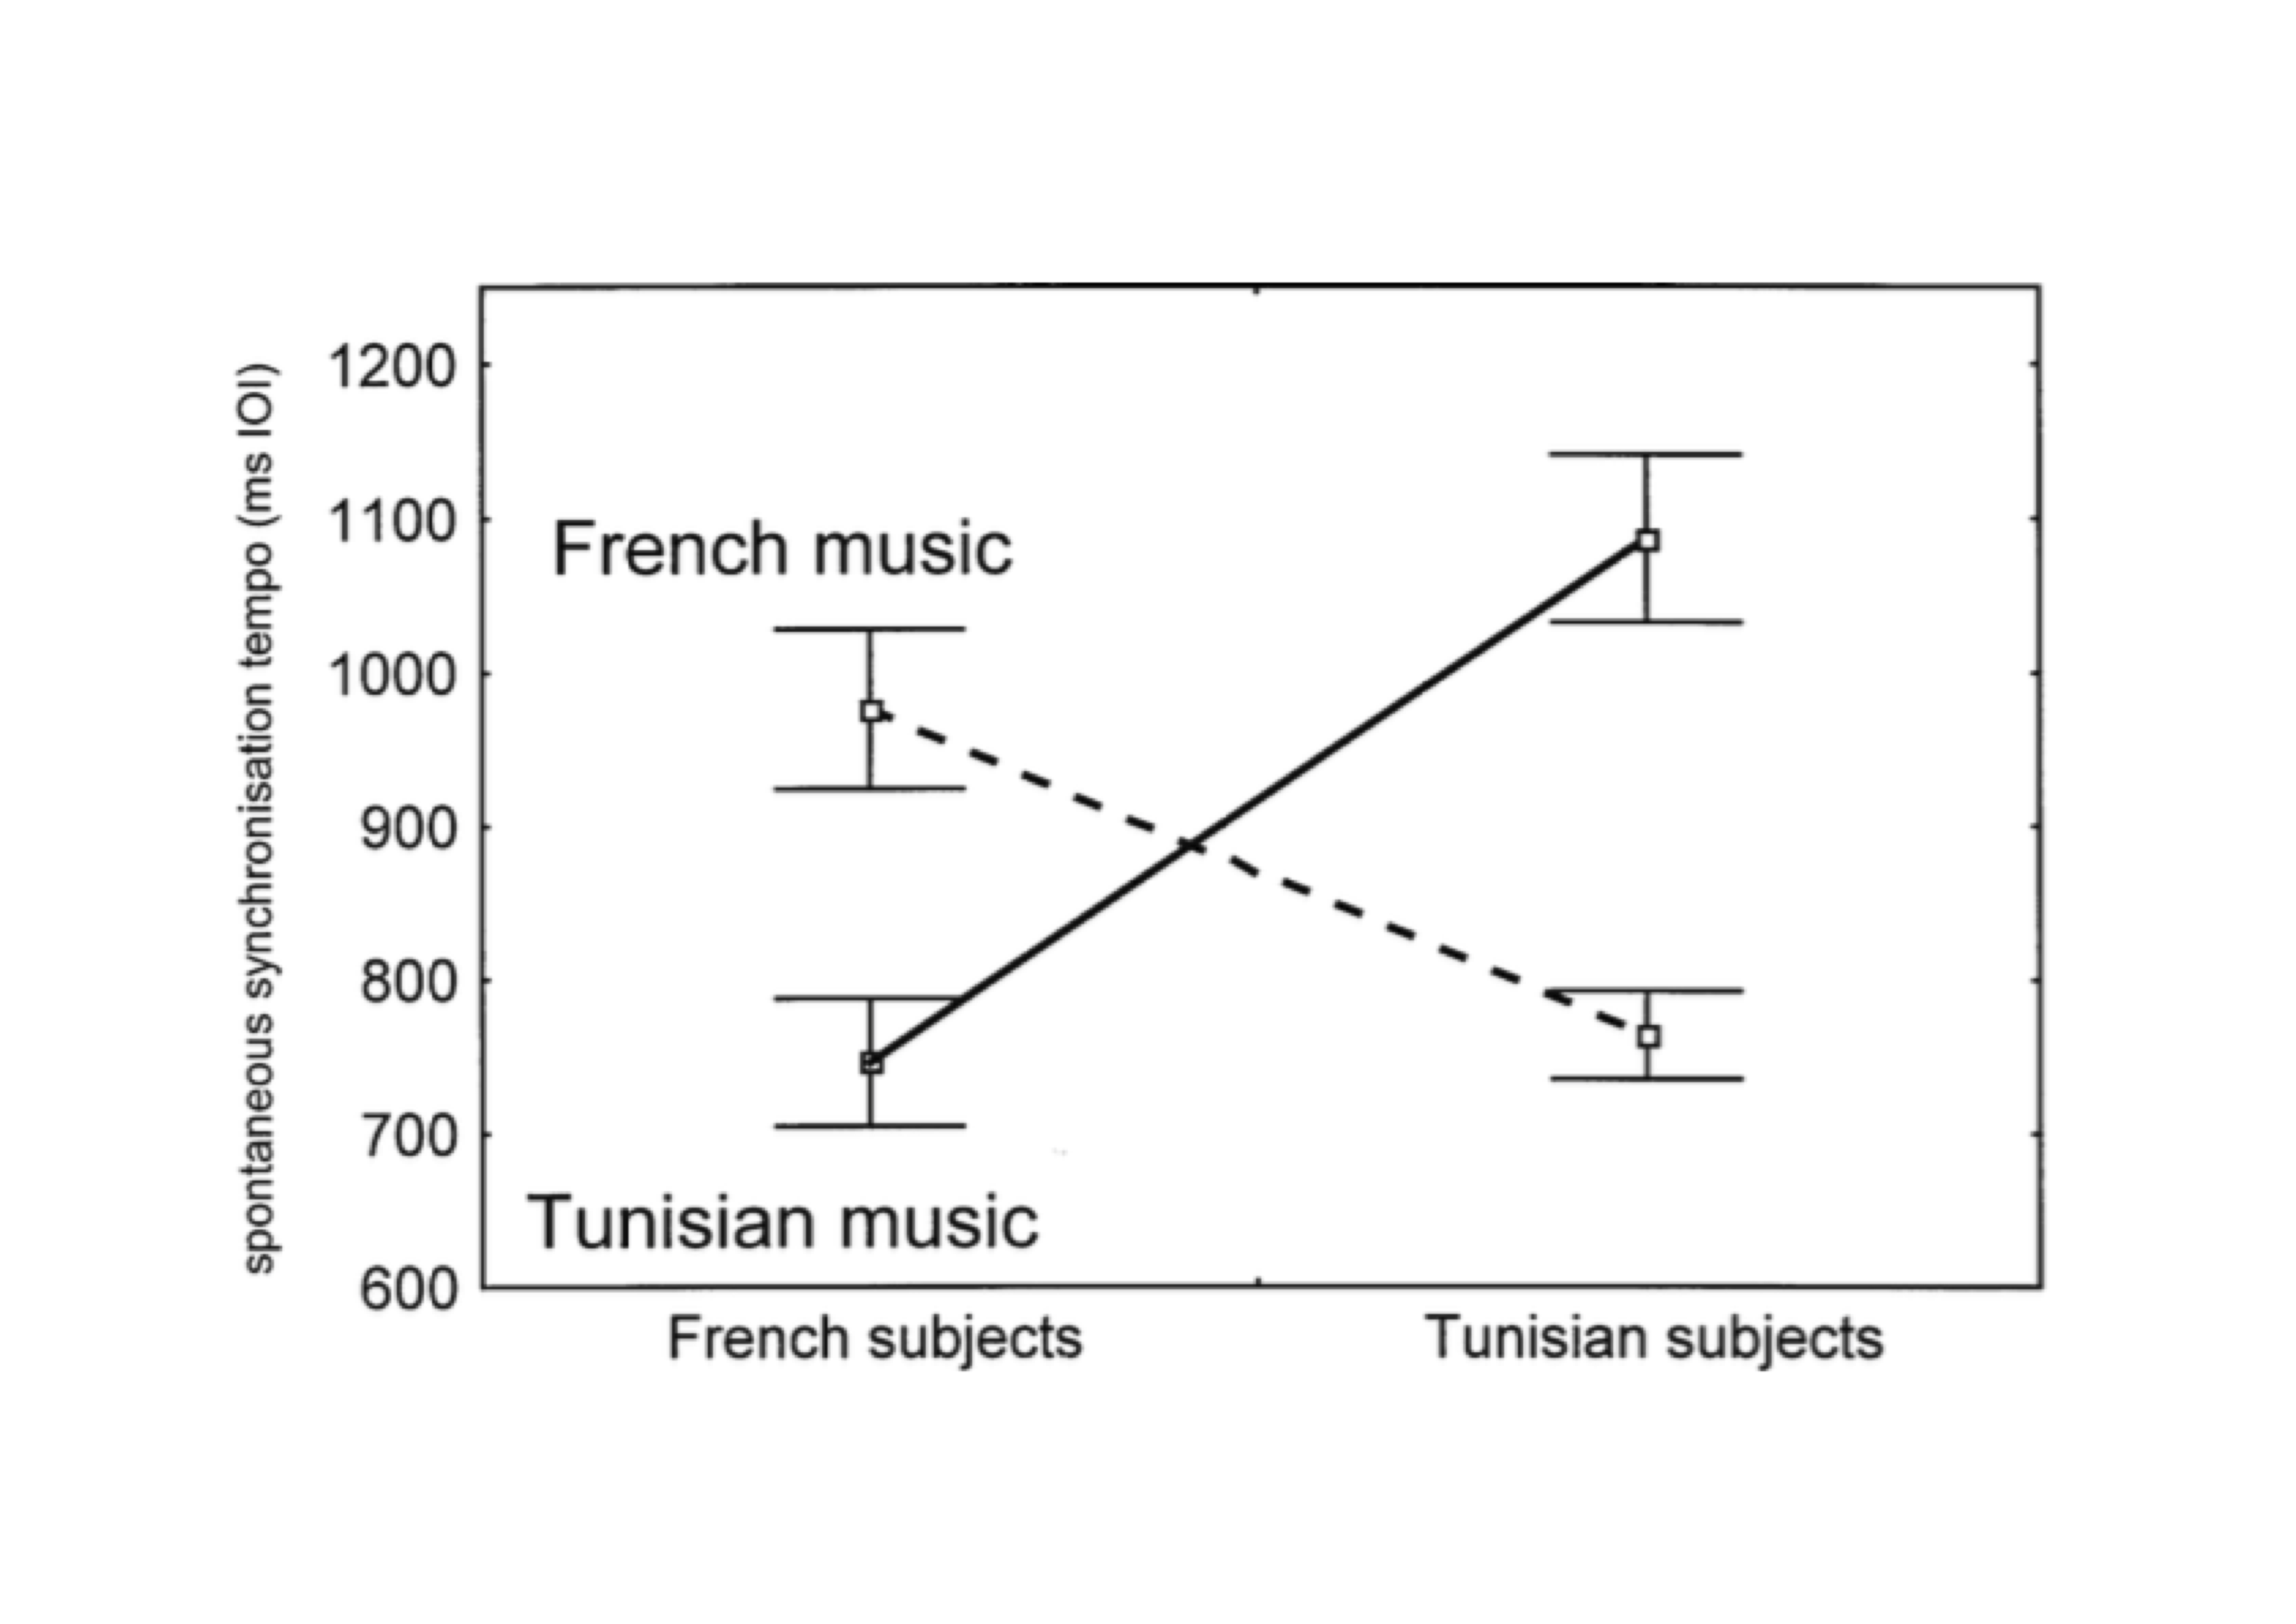 Average time interval between taps (IOI, in ms) for two groups of listeners and two types of music (from Drake and Ben El Heni, 2003, Fig.2).